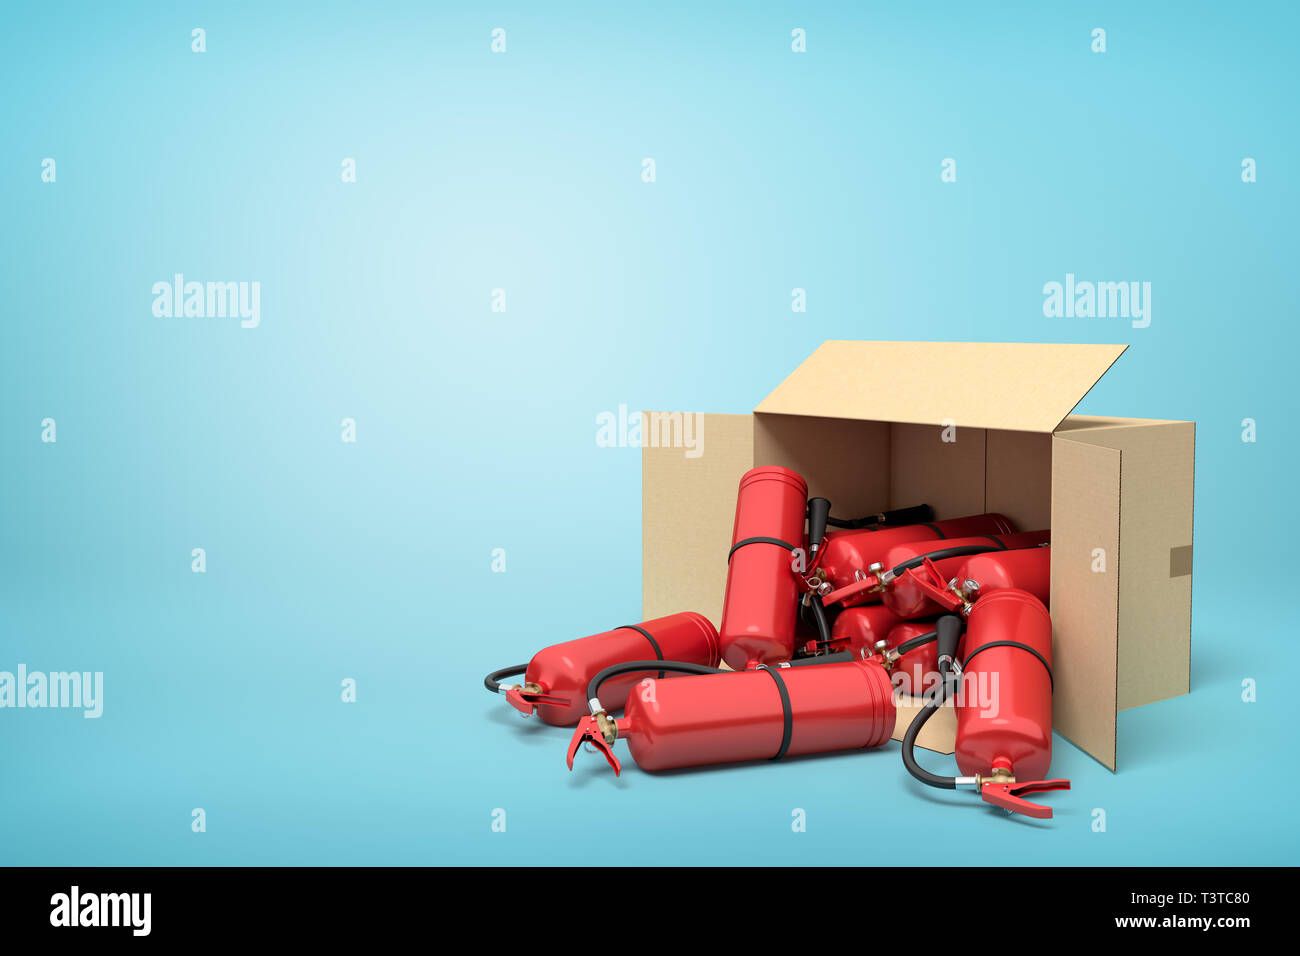 3d rendering of cardboard box lying sidelong full of red fire extinguishers on blue background. Stock Photo